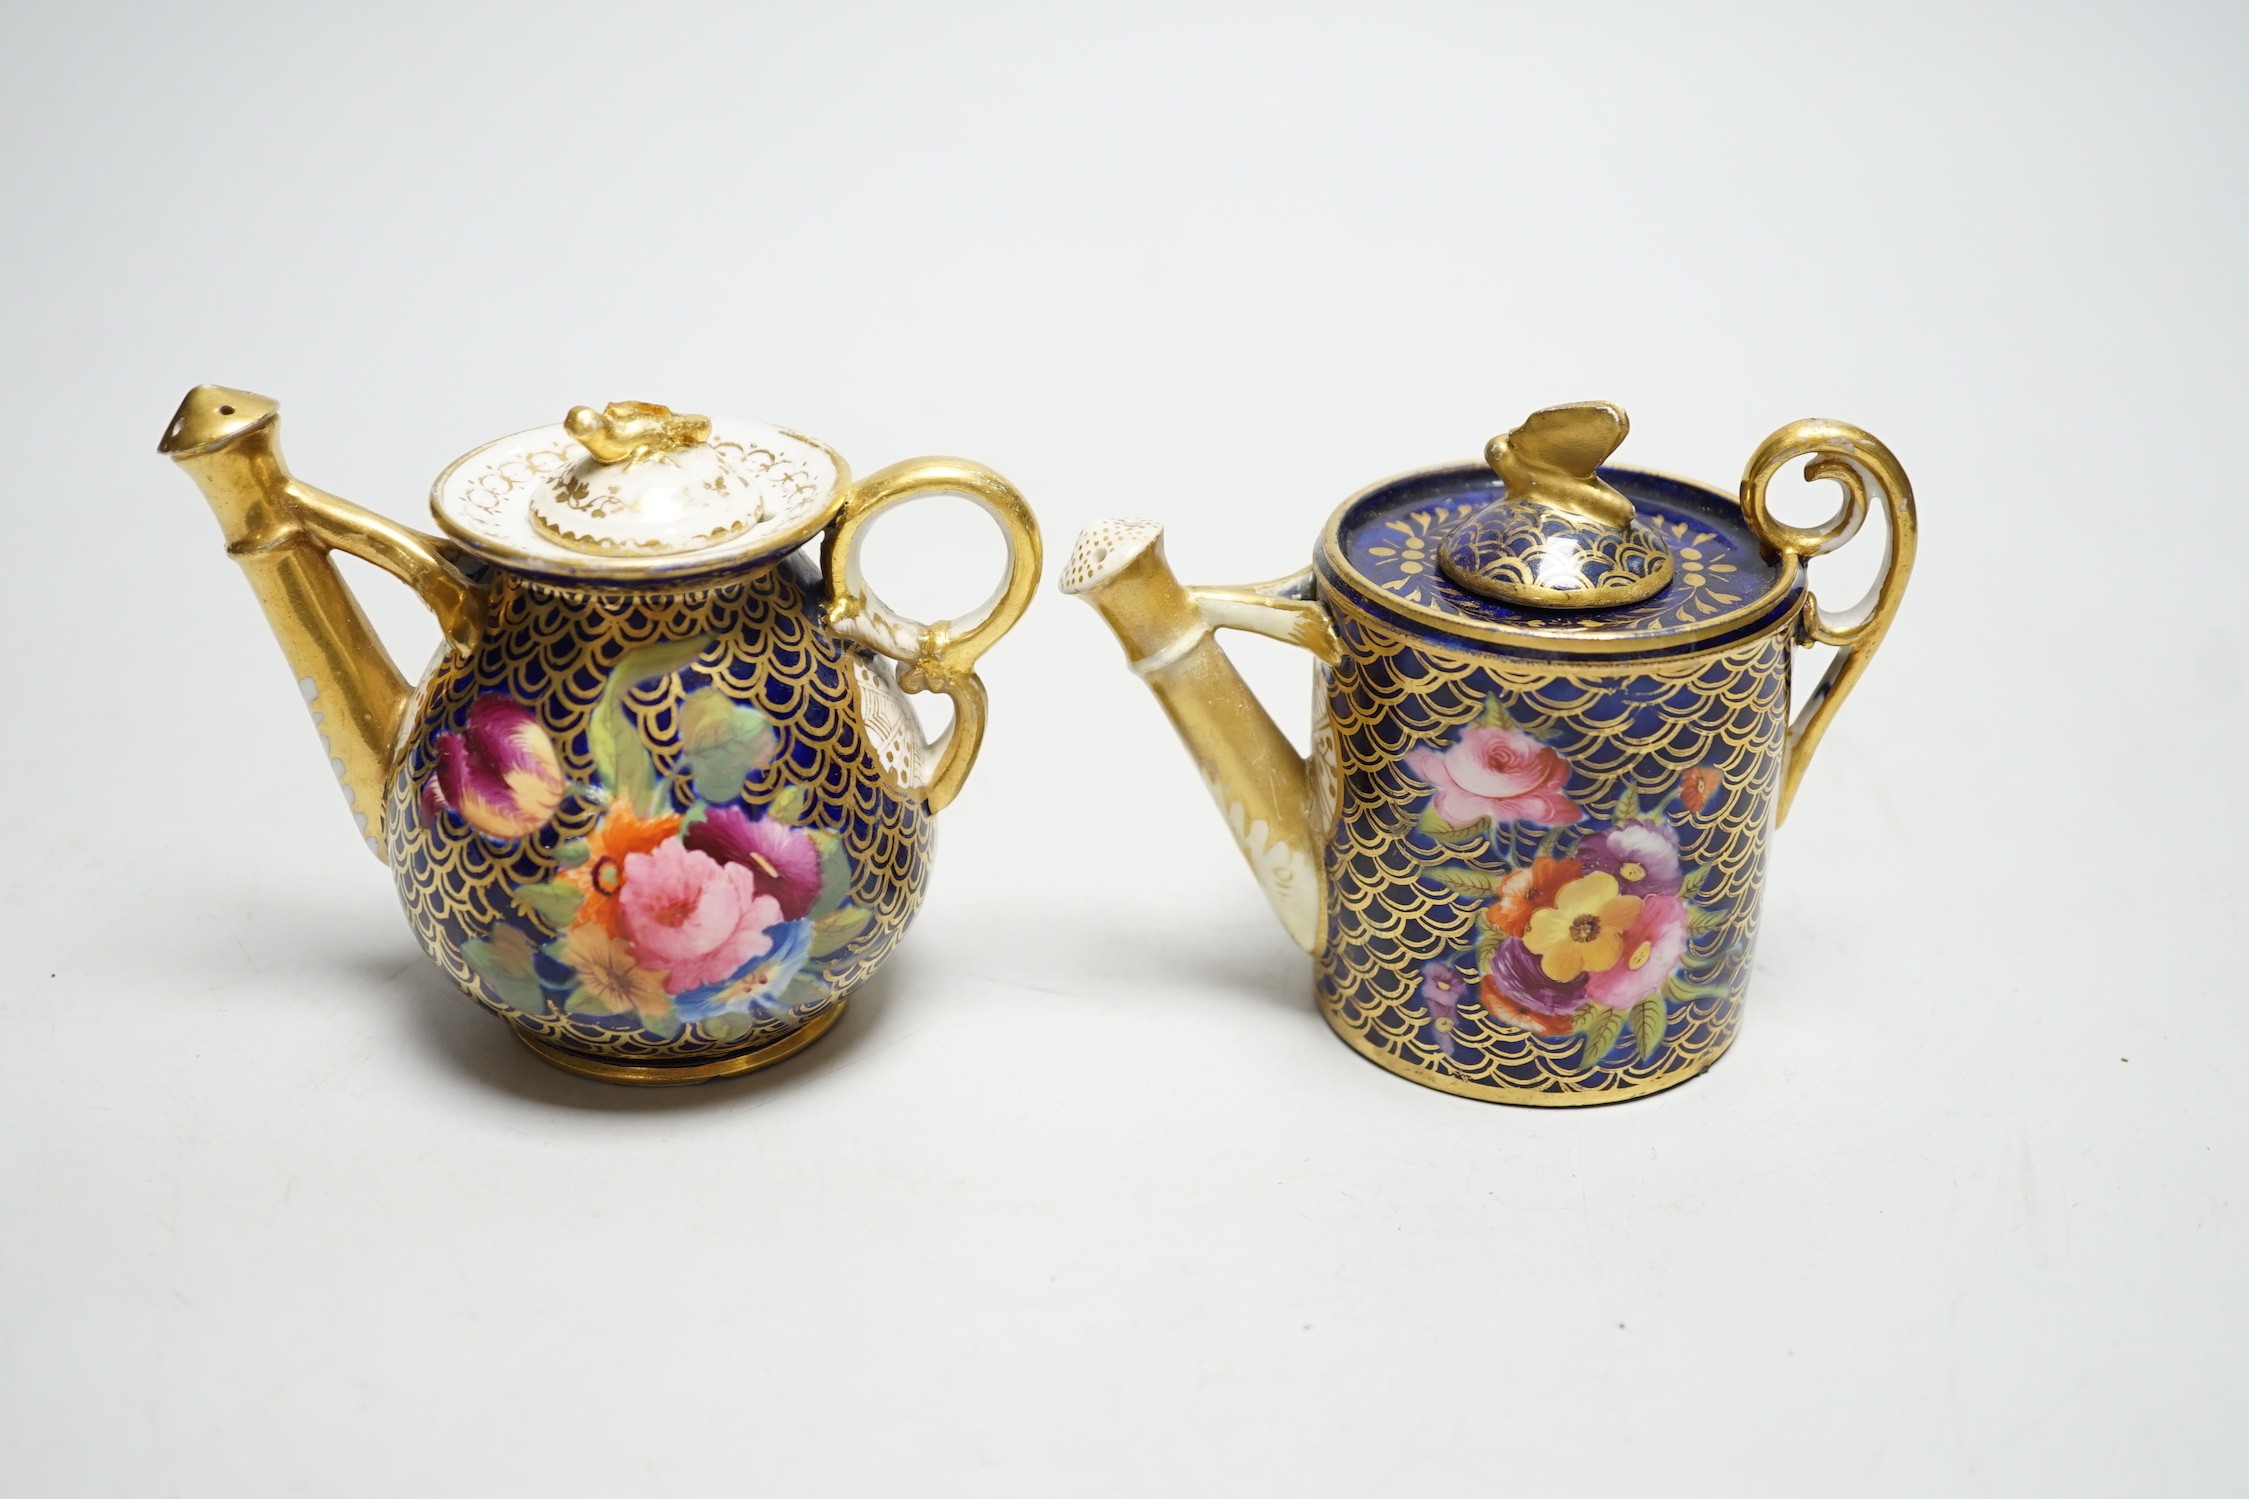 Toy porcelain: Two English rosewater scale ground sprinklers, c.1815-20, possibly Coalport, each modelled in the form of a watering can